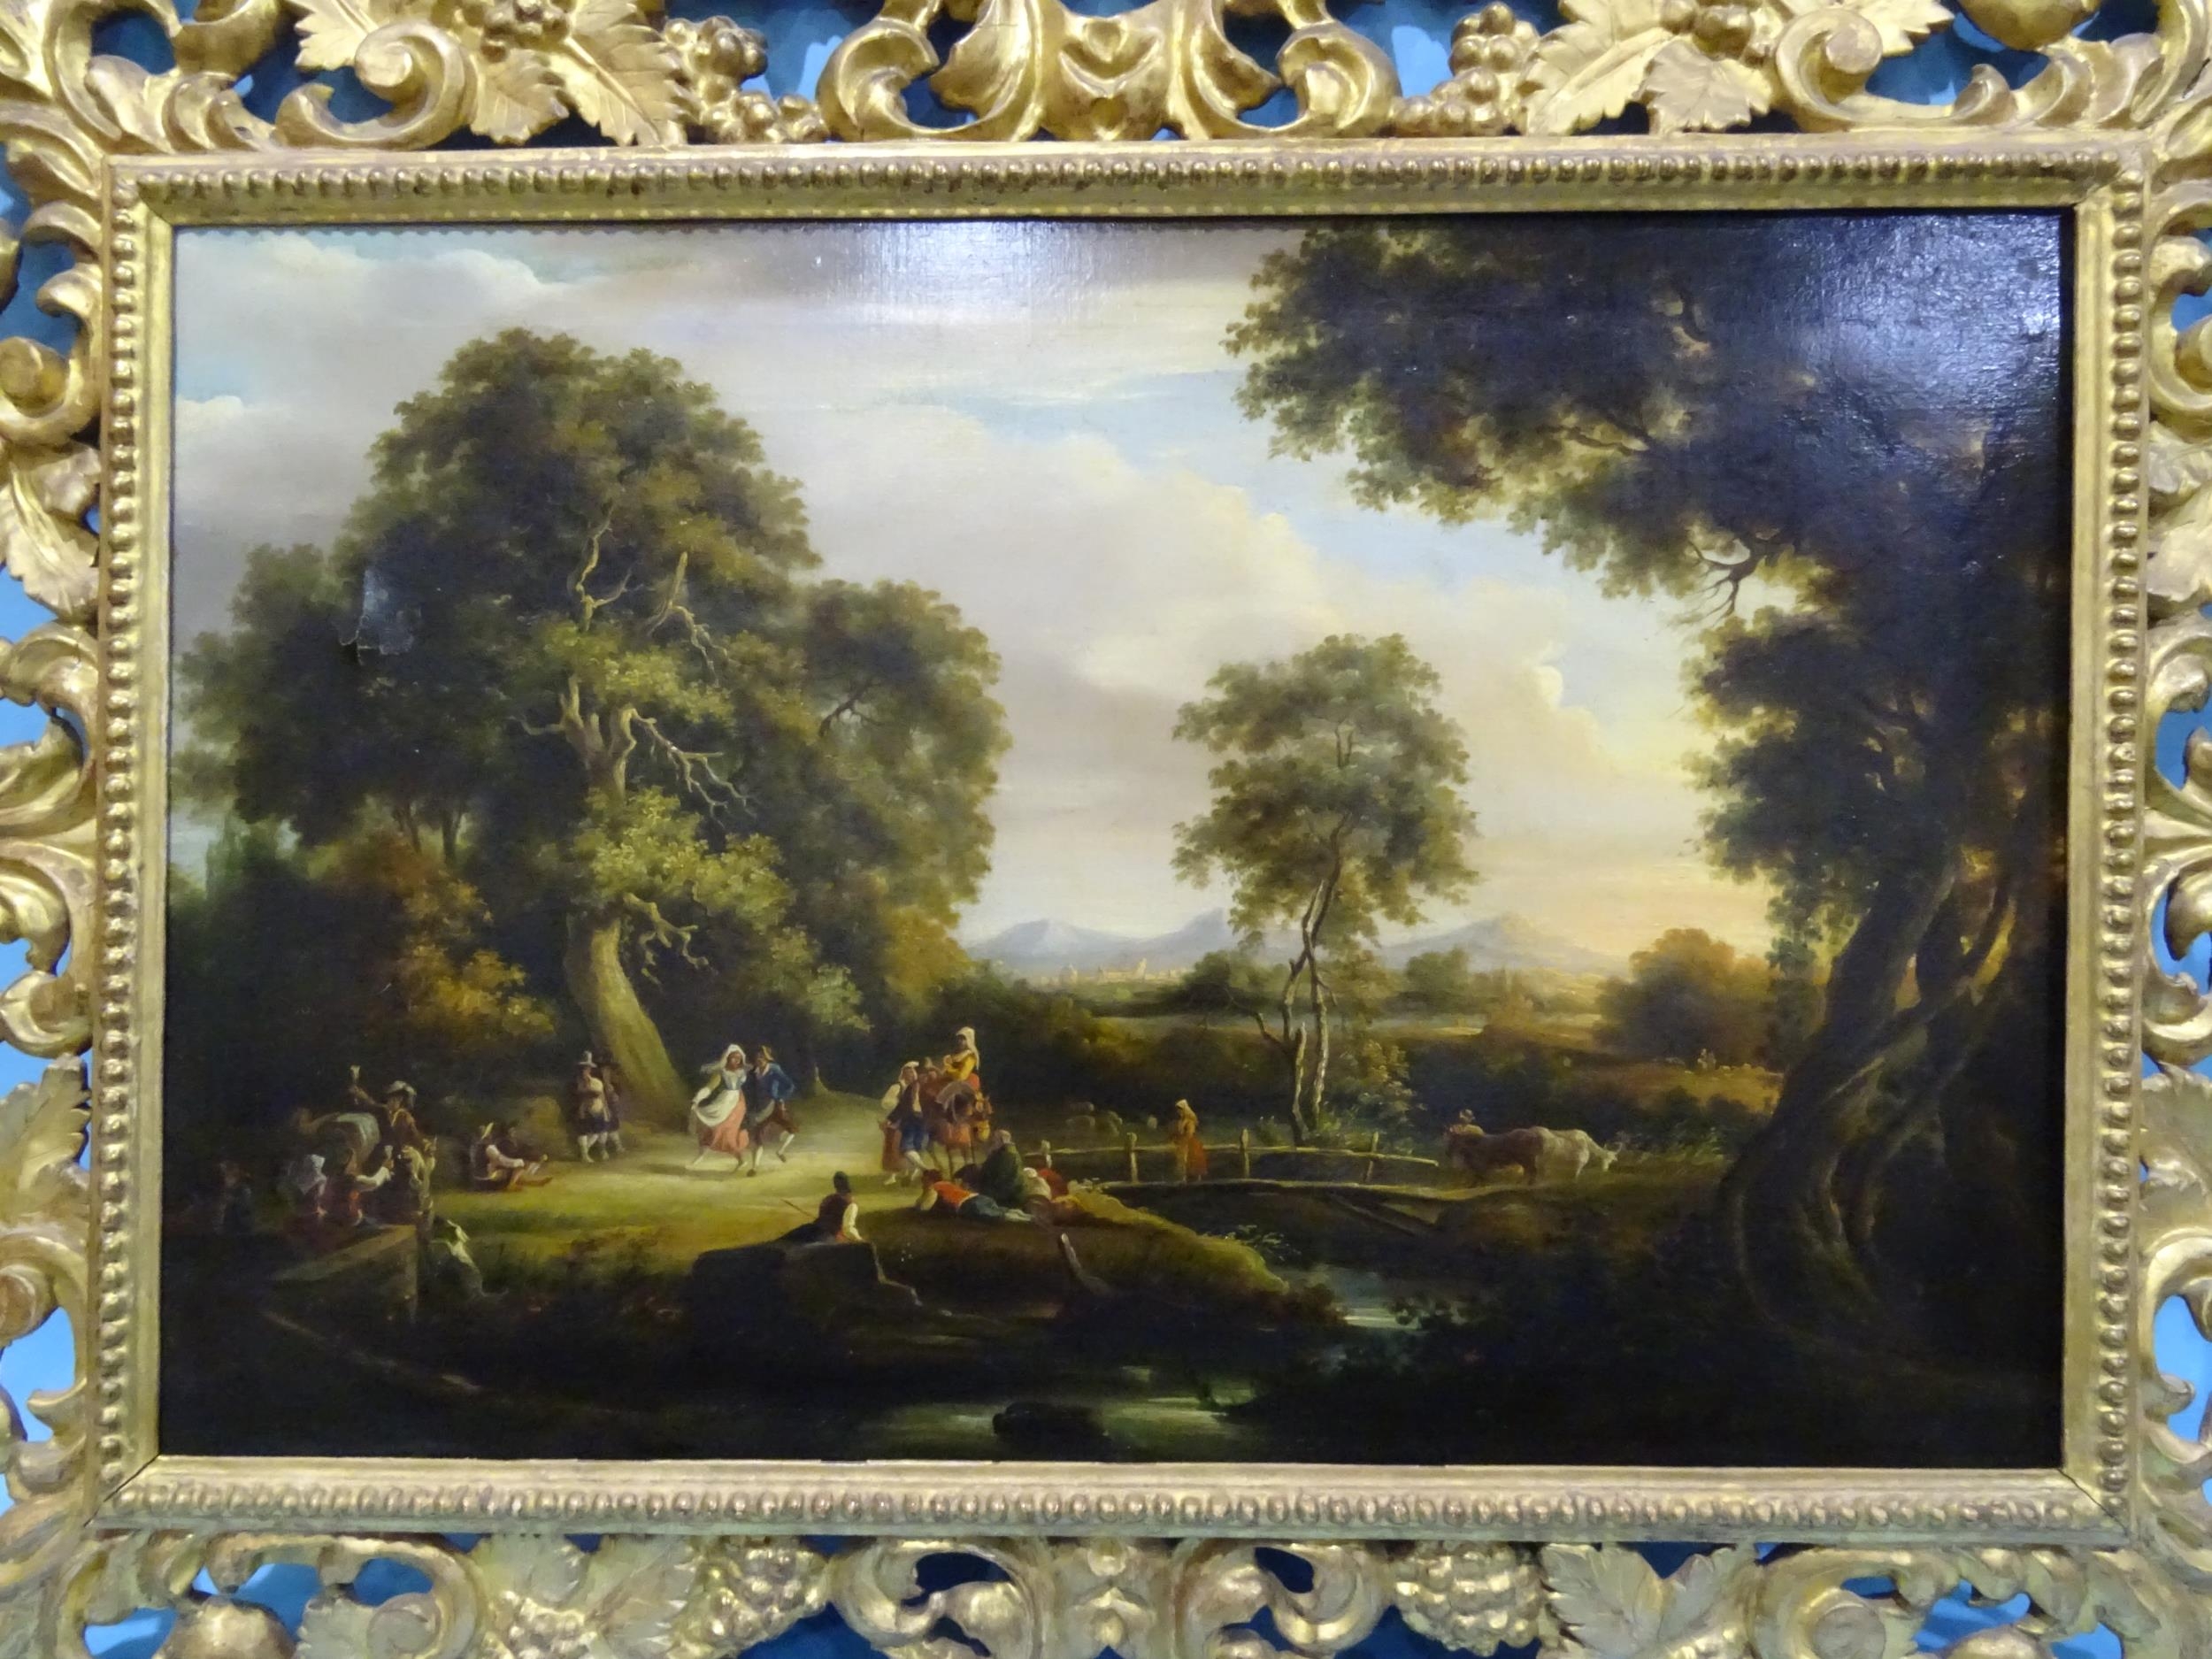 18th century Italian School FIGURES CELEBRATING IN A RURAL LANDSCAPE WITH PISA IN THE BACKGROUND - Image 2 of 2